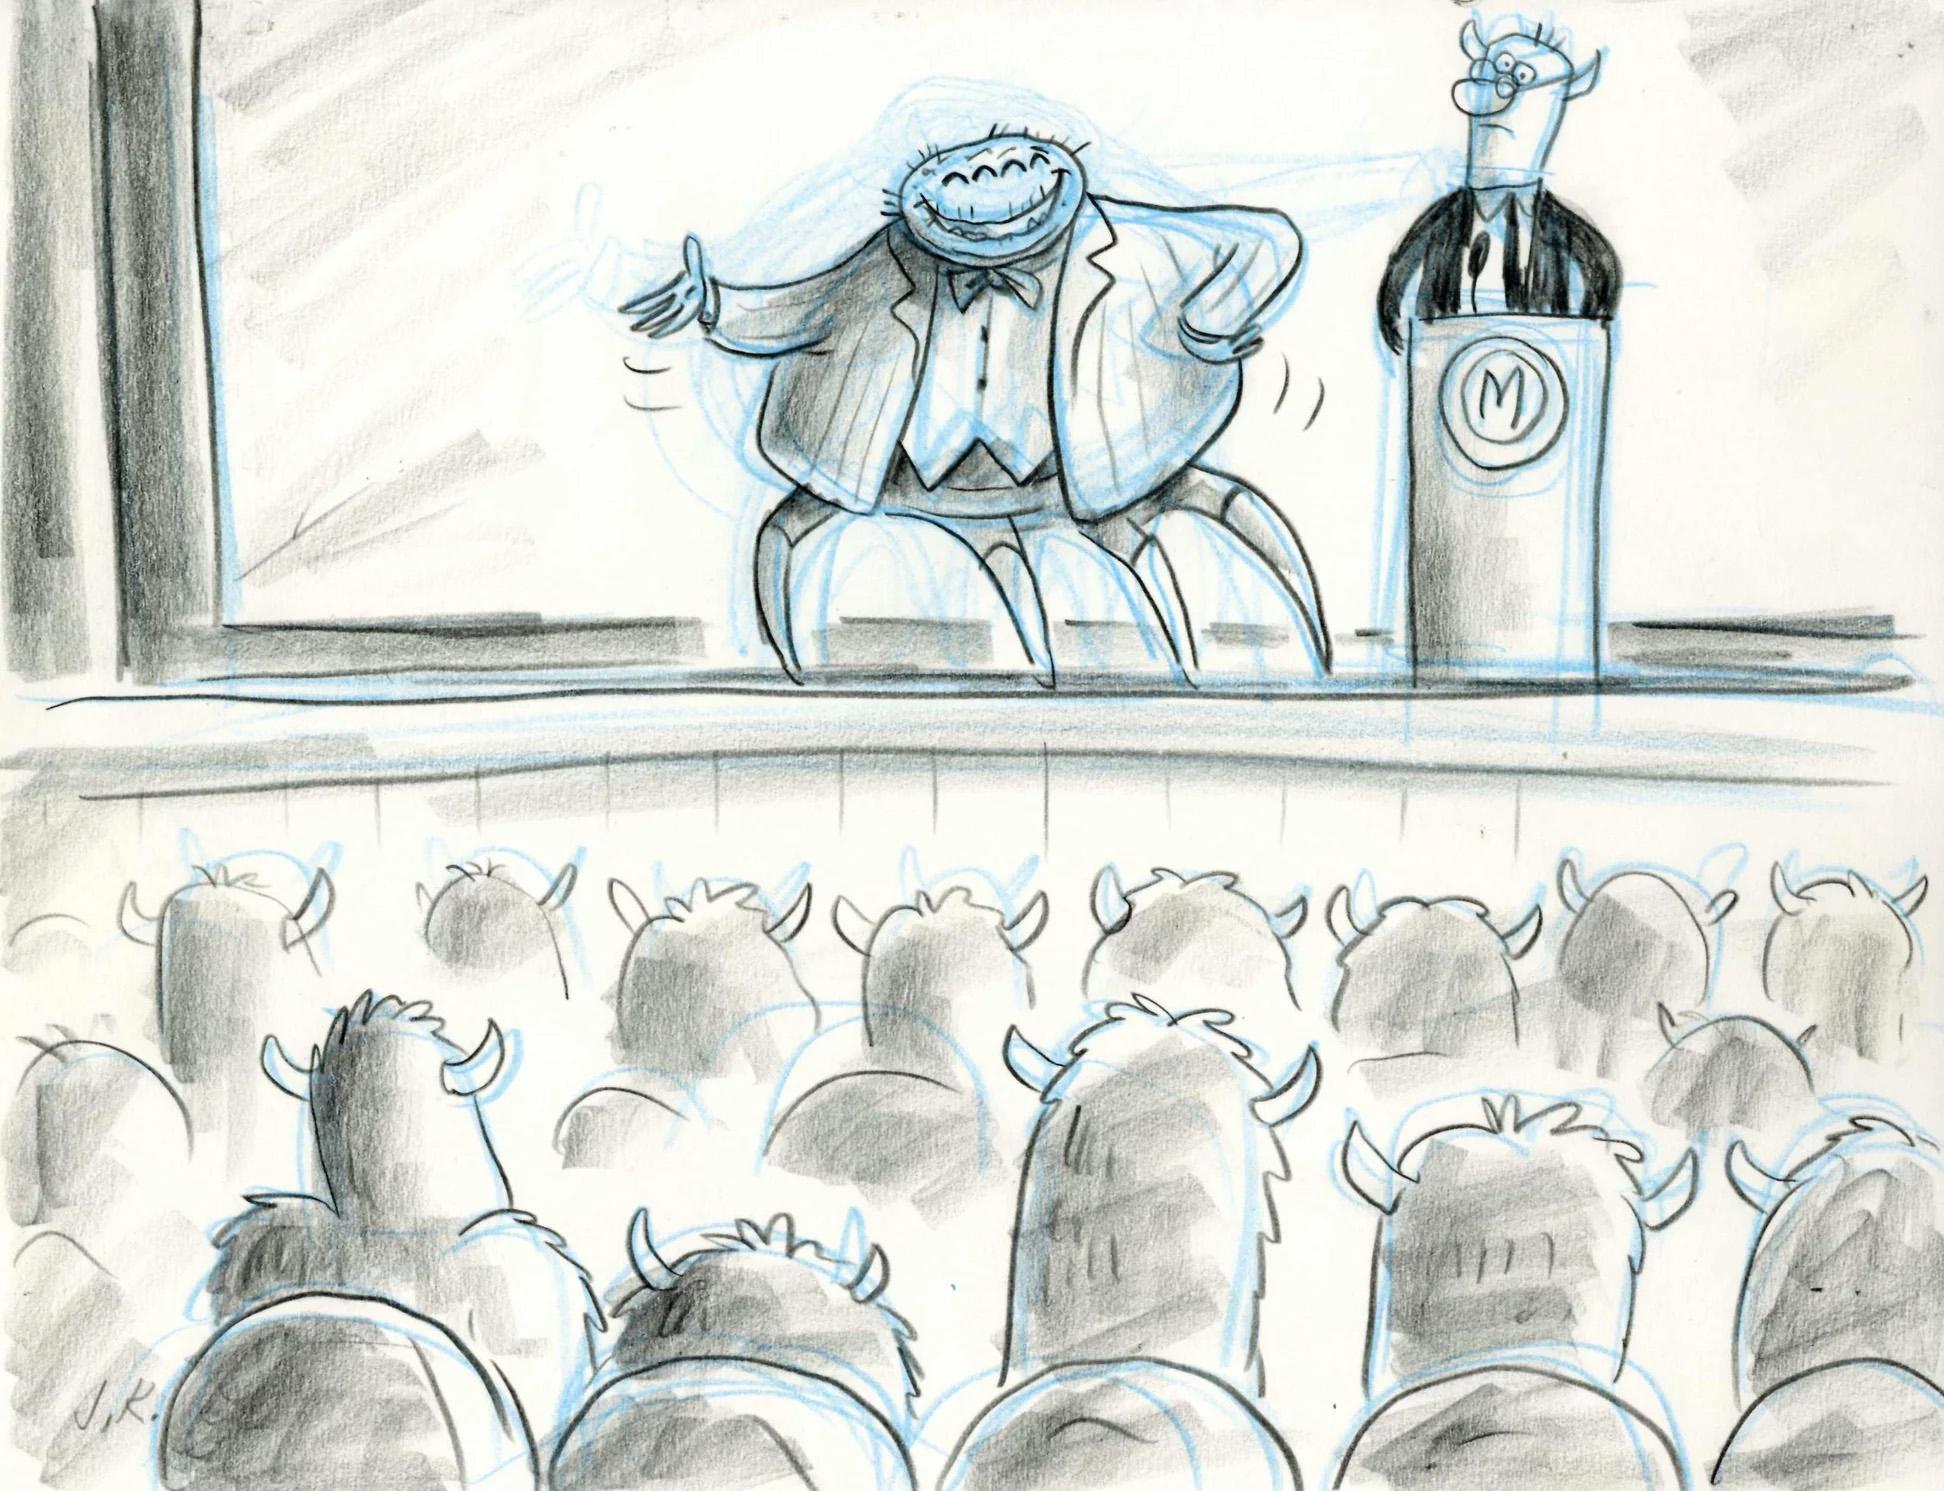 Monster's Inc Storyboard Drawing: Sully and Mike in Audience - Art by Jorgen Klubien